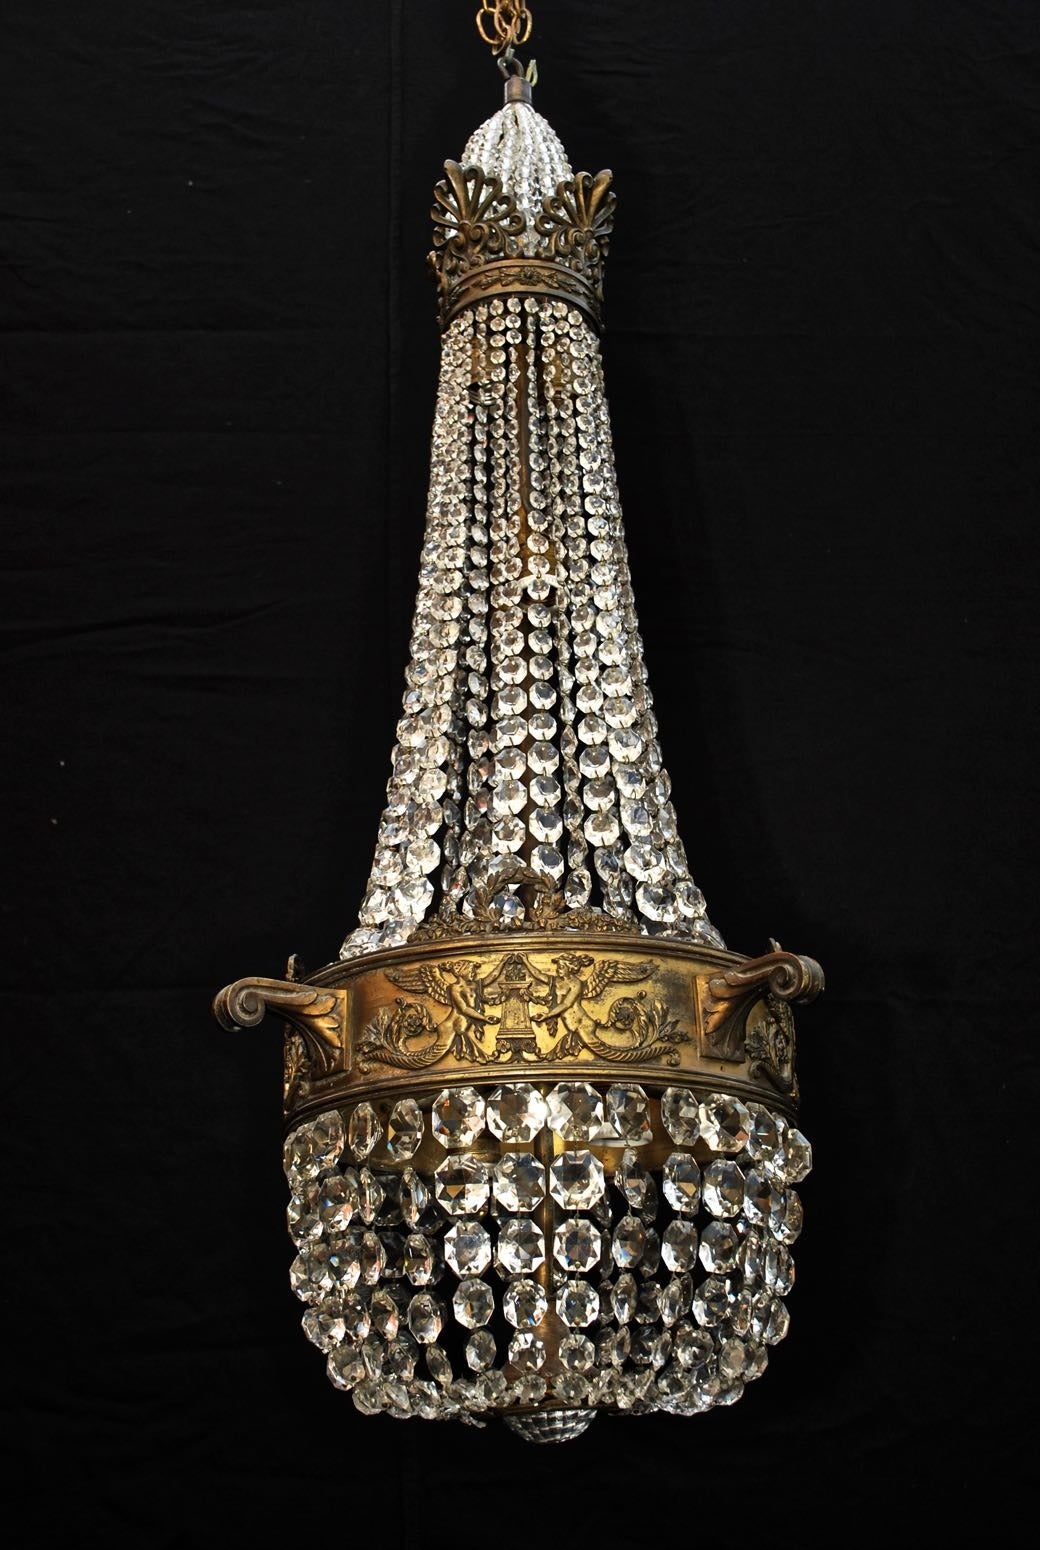 We have over 3000 antique sconces and over 1000 antique lights, if you need a specific pair of sconces or lights; use the 